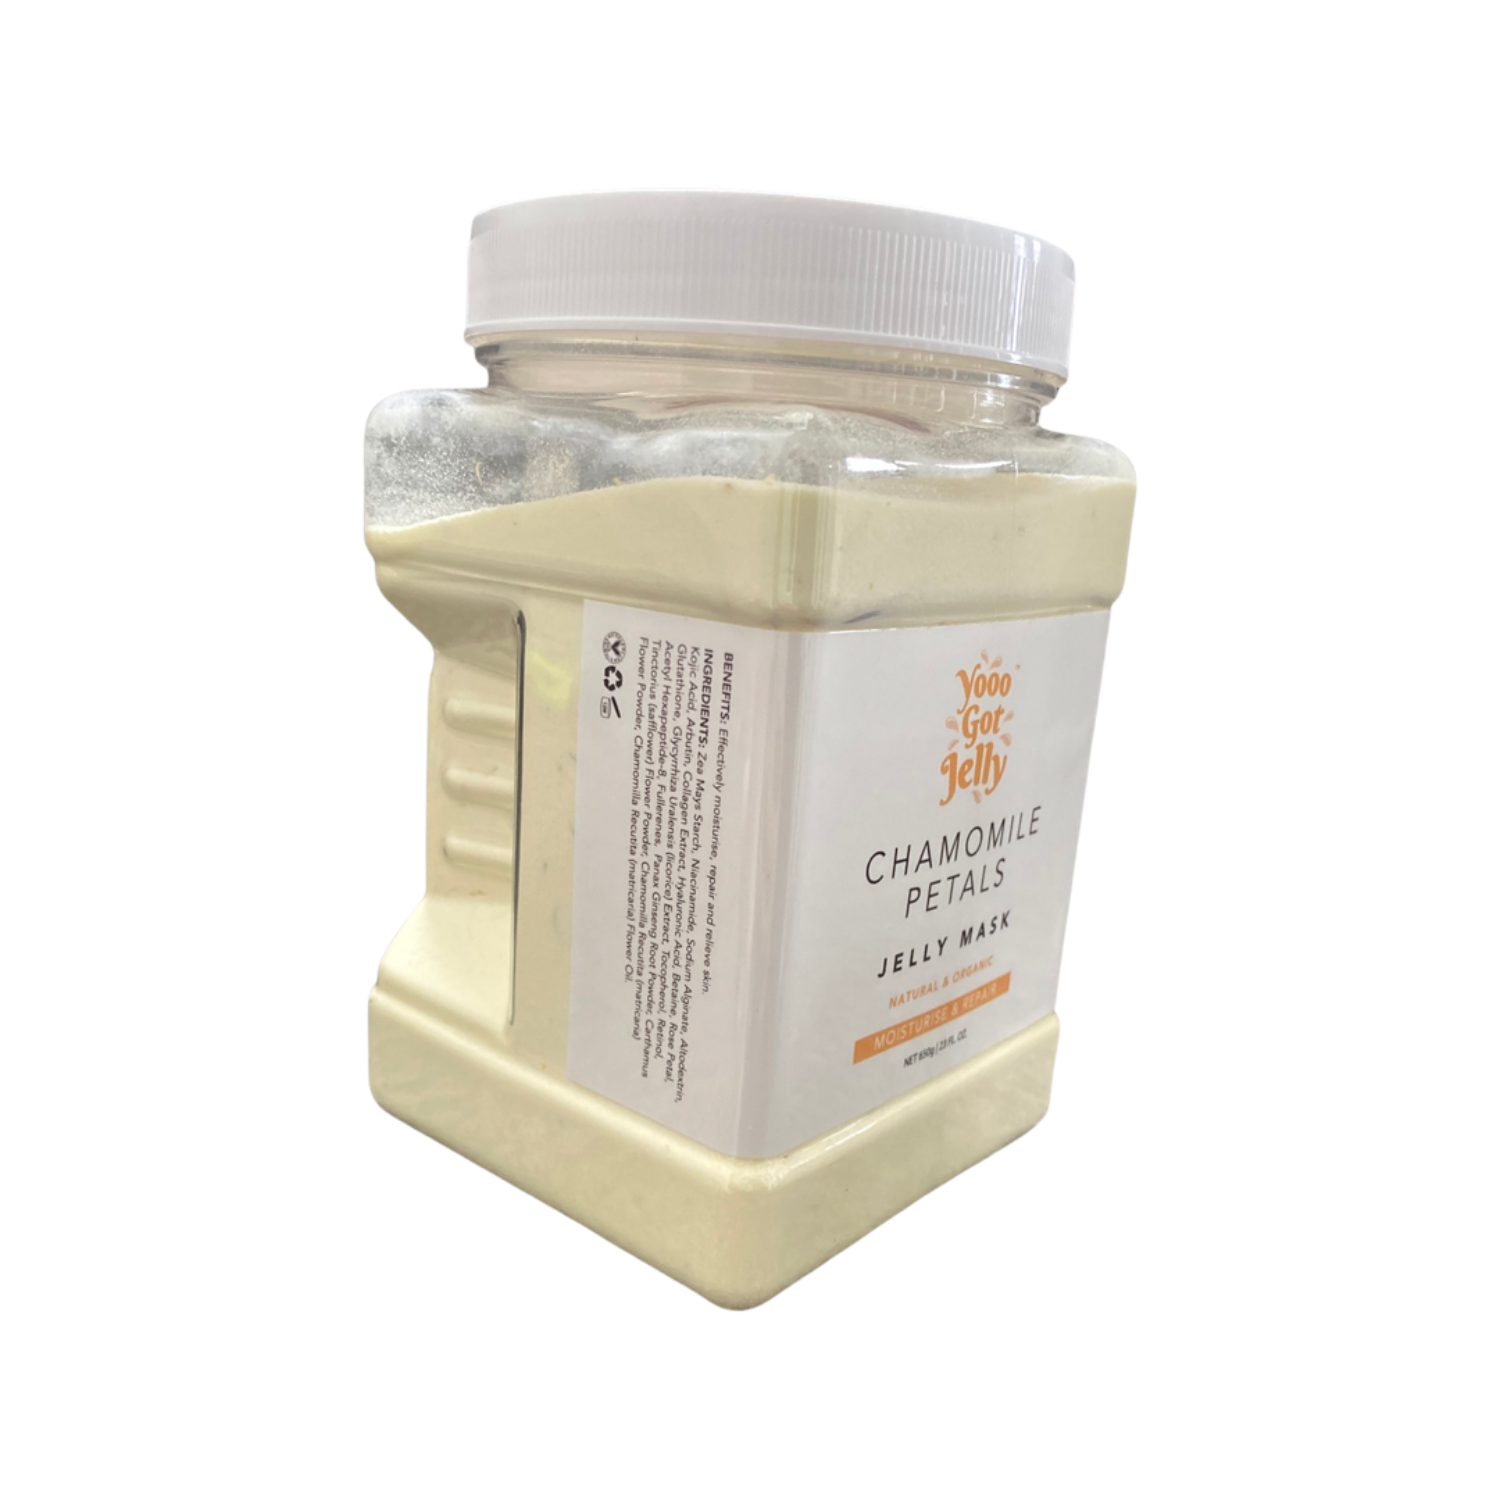 CHAMOMILE PETALS JELLY MASK - Moisturise and Repair